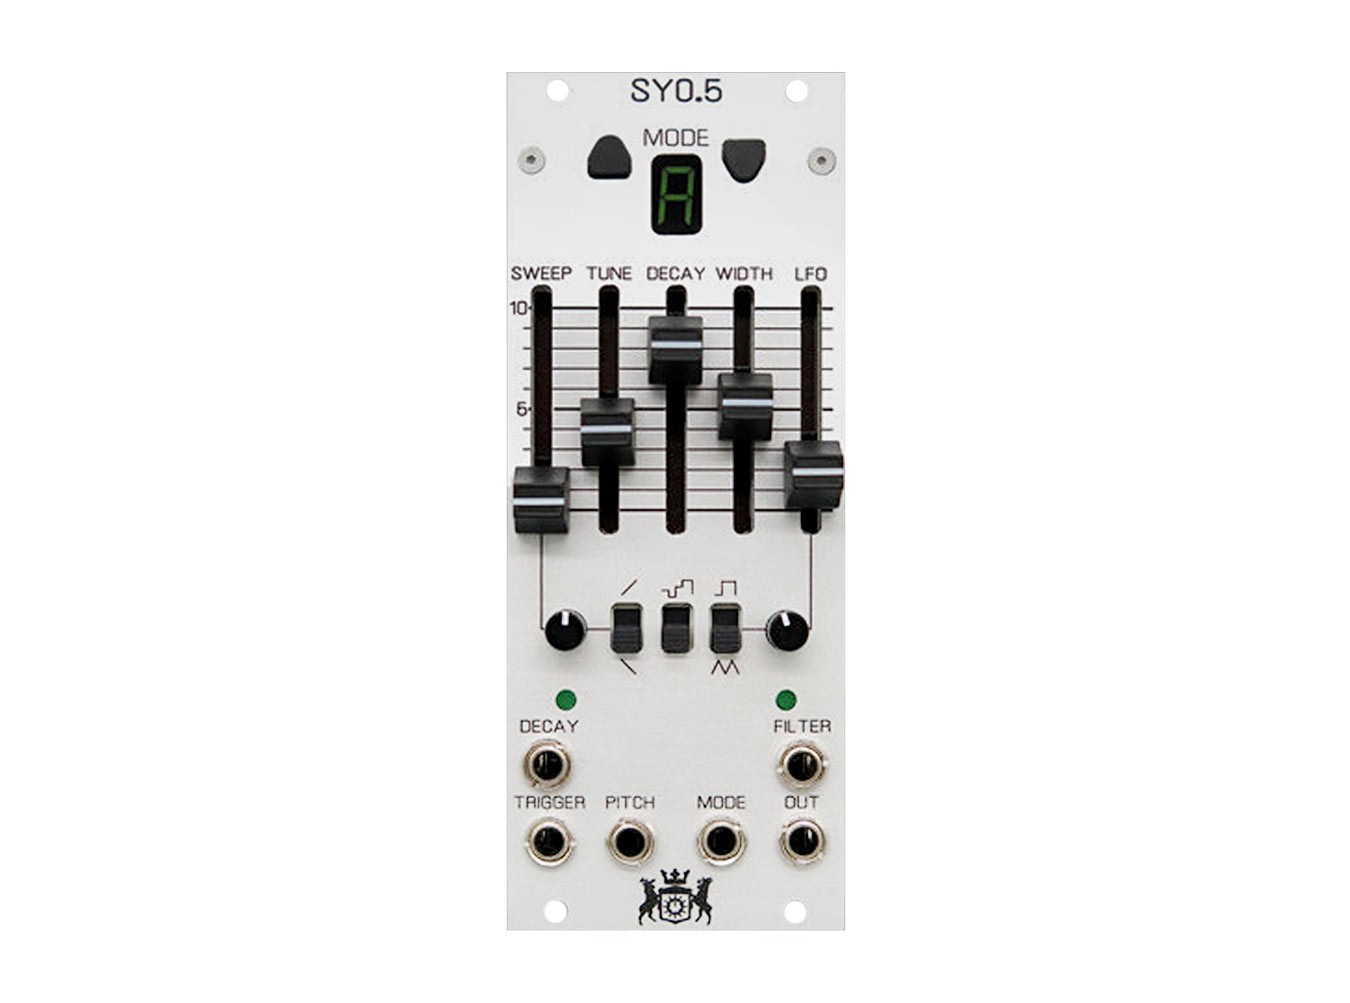 SY0.5 Drum Synthesis Voice